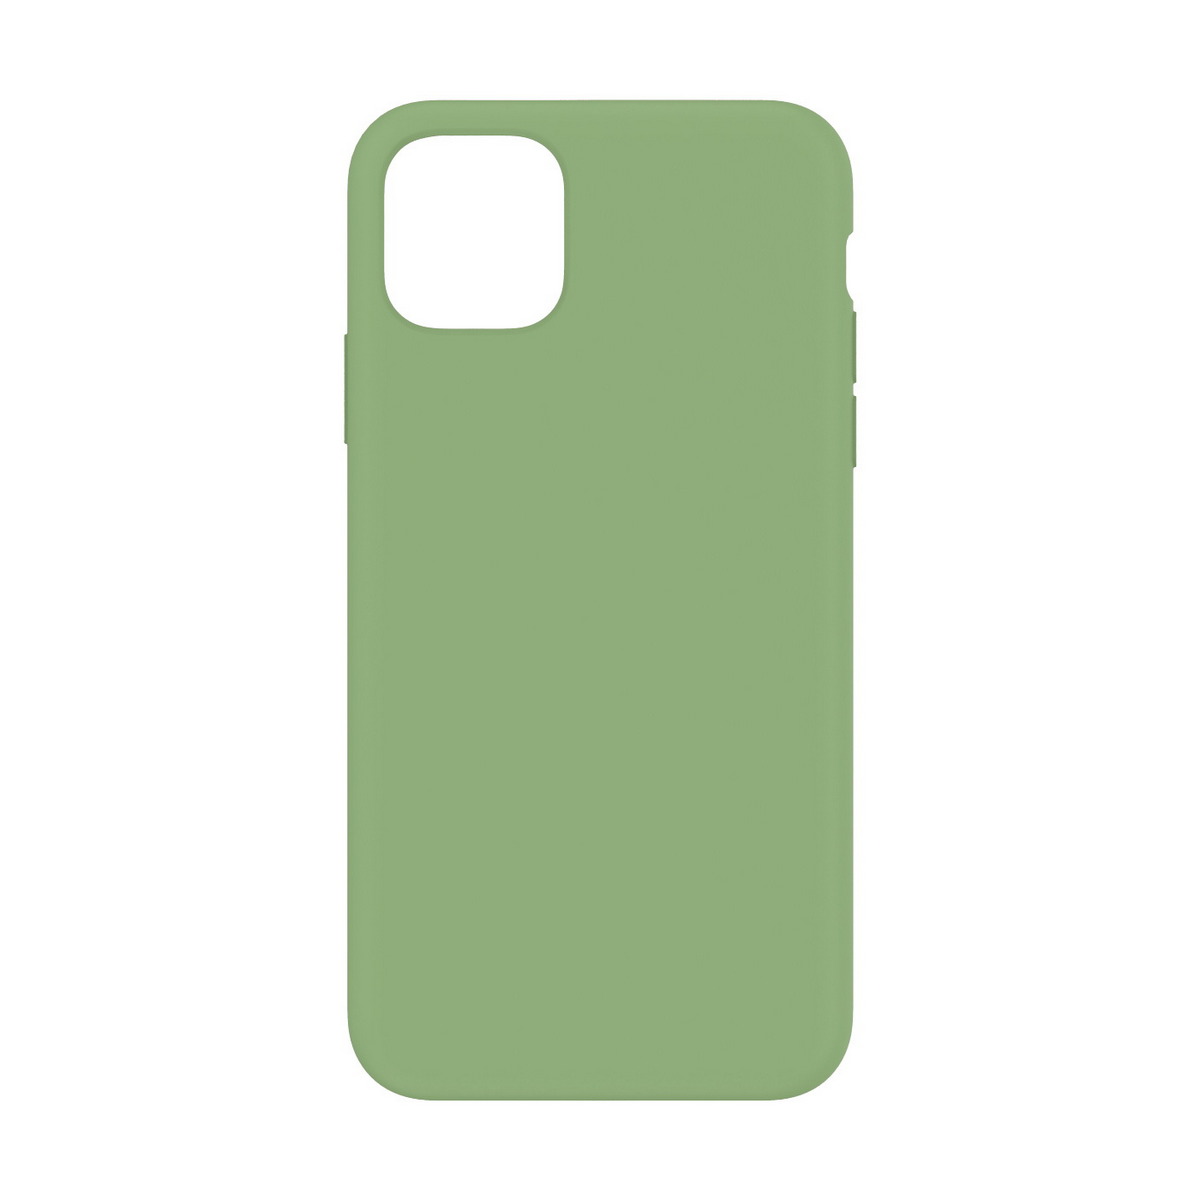 HEAL Case for iPhone 11 Pro (Mint Green) Case Silicone